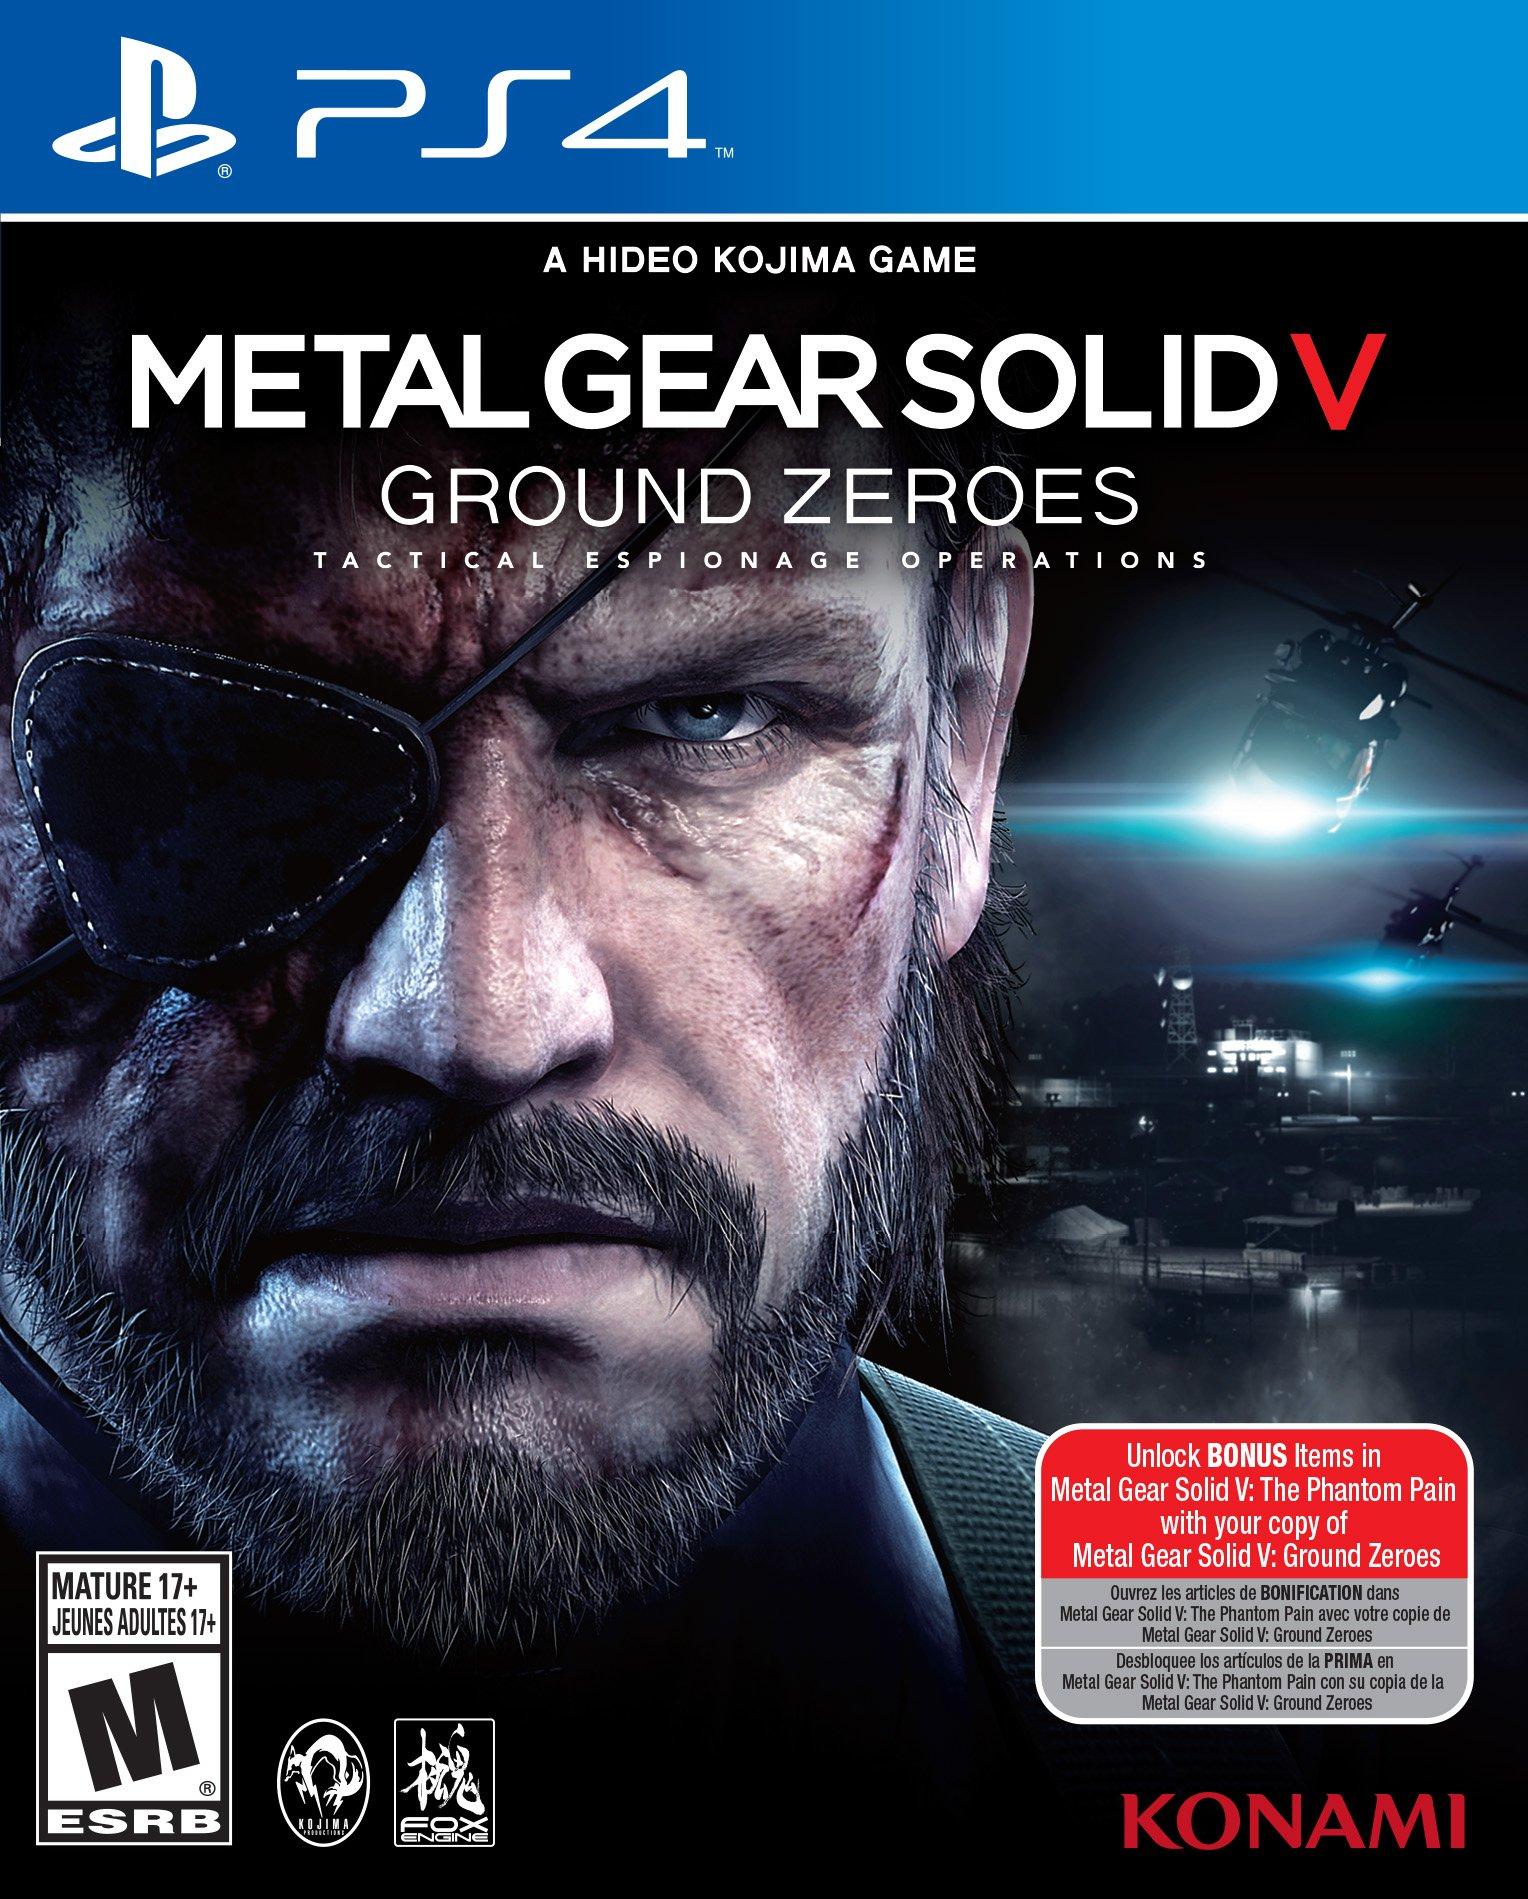 play metal gear solid 4 on ps4